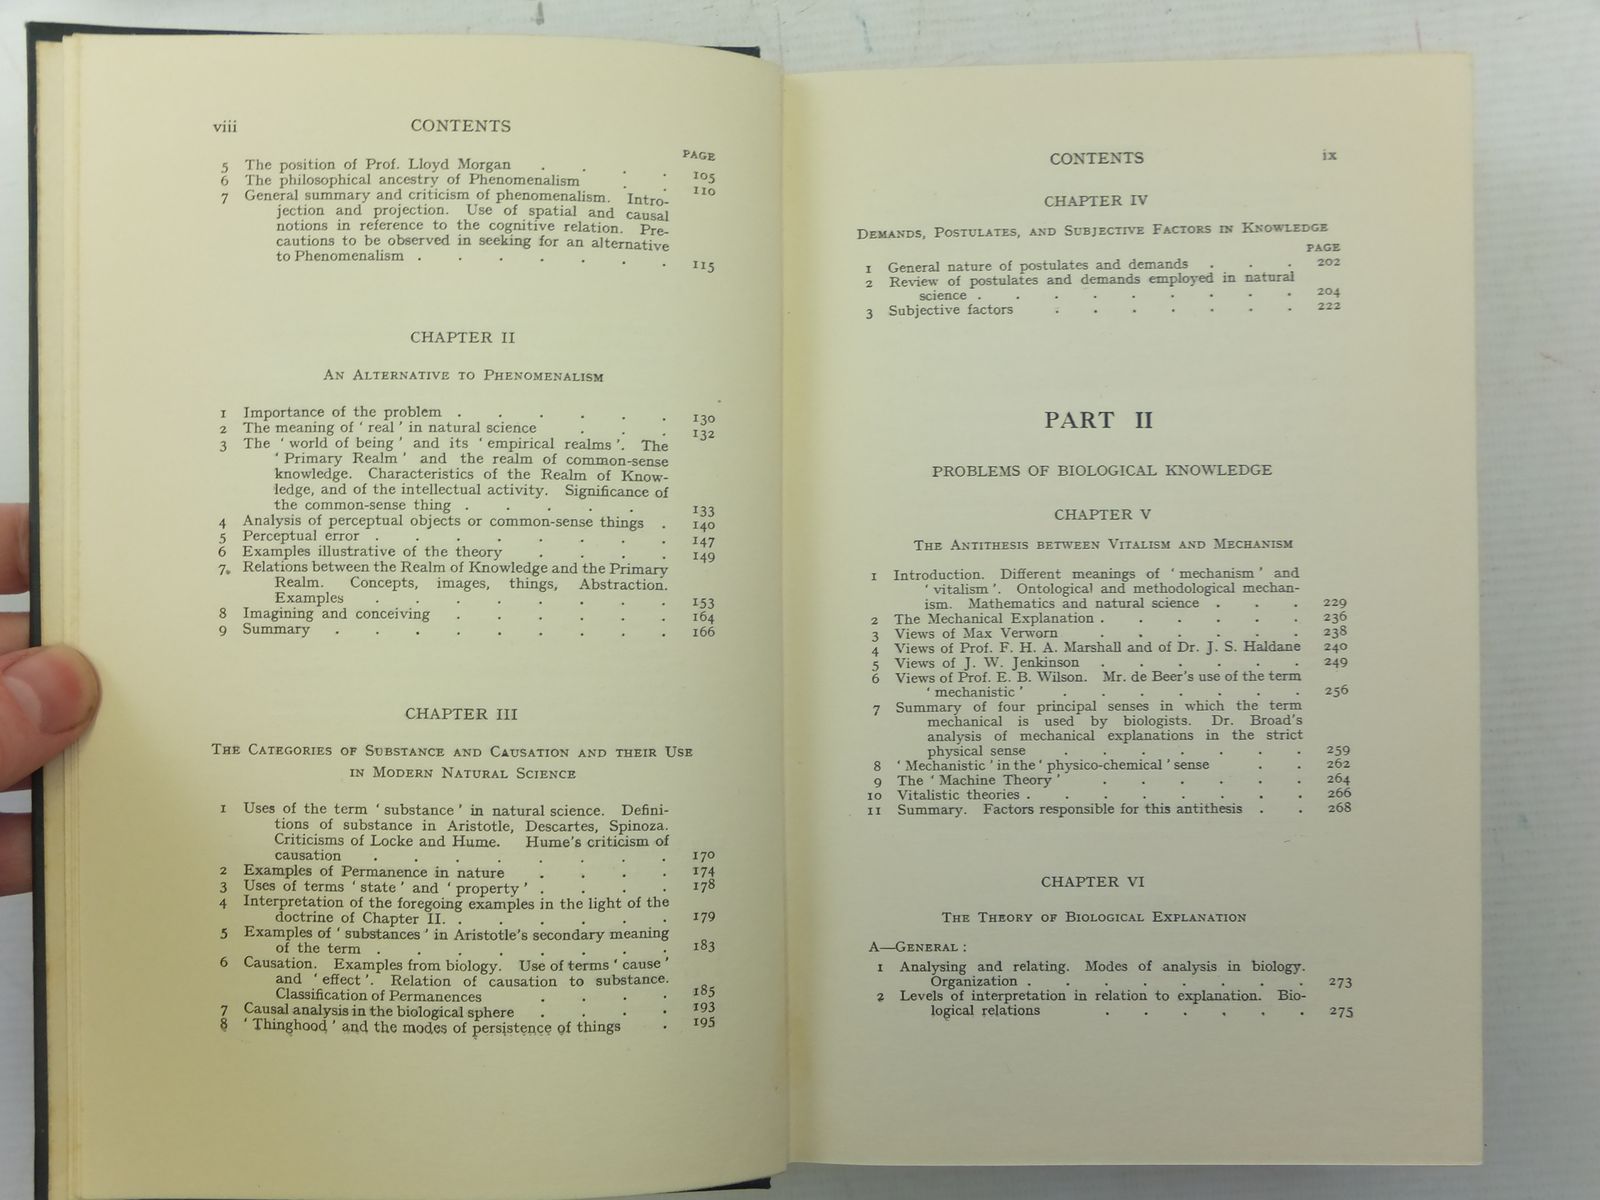 Photo of BIOLOGICAL PRINCIPLES A CRITICAL STUDY written by Woodger, J.H. published by Kegan Paul, Trench, Trubner & Co. Ltd. (STOCK CODE: 2114984)  for sale by Stella & Rose's Books